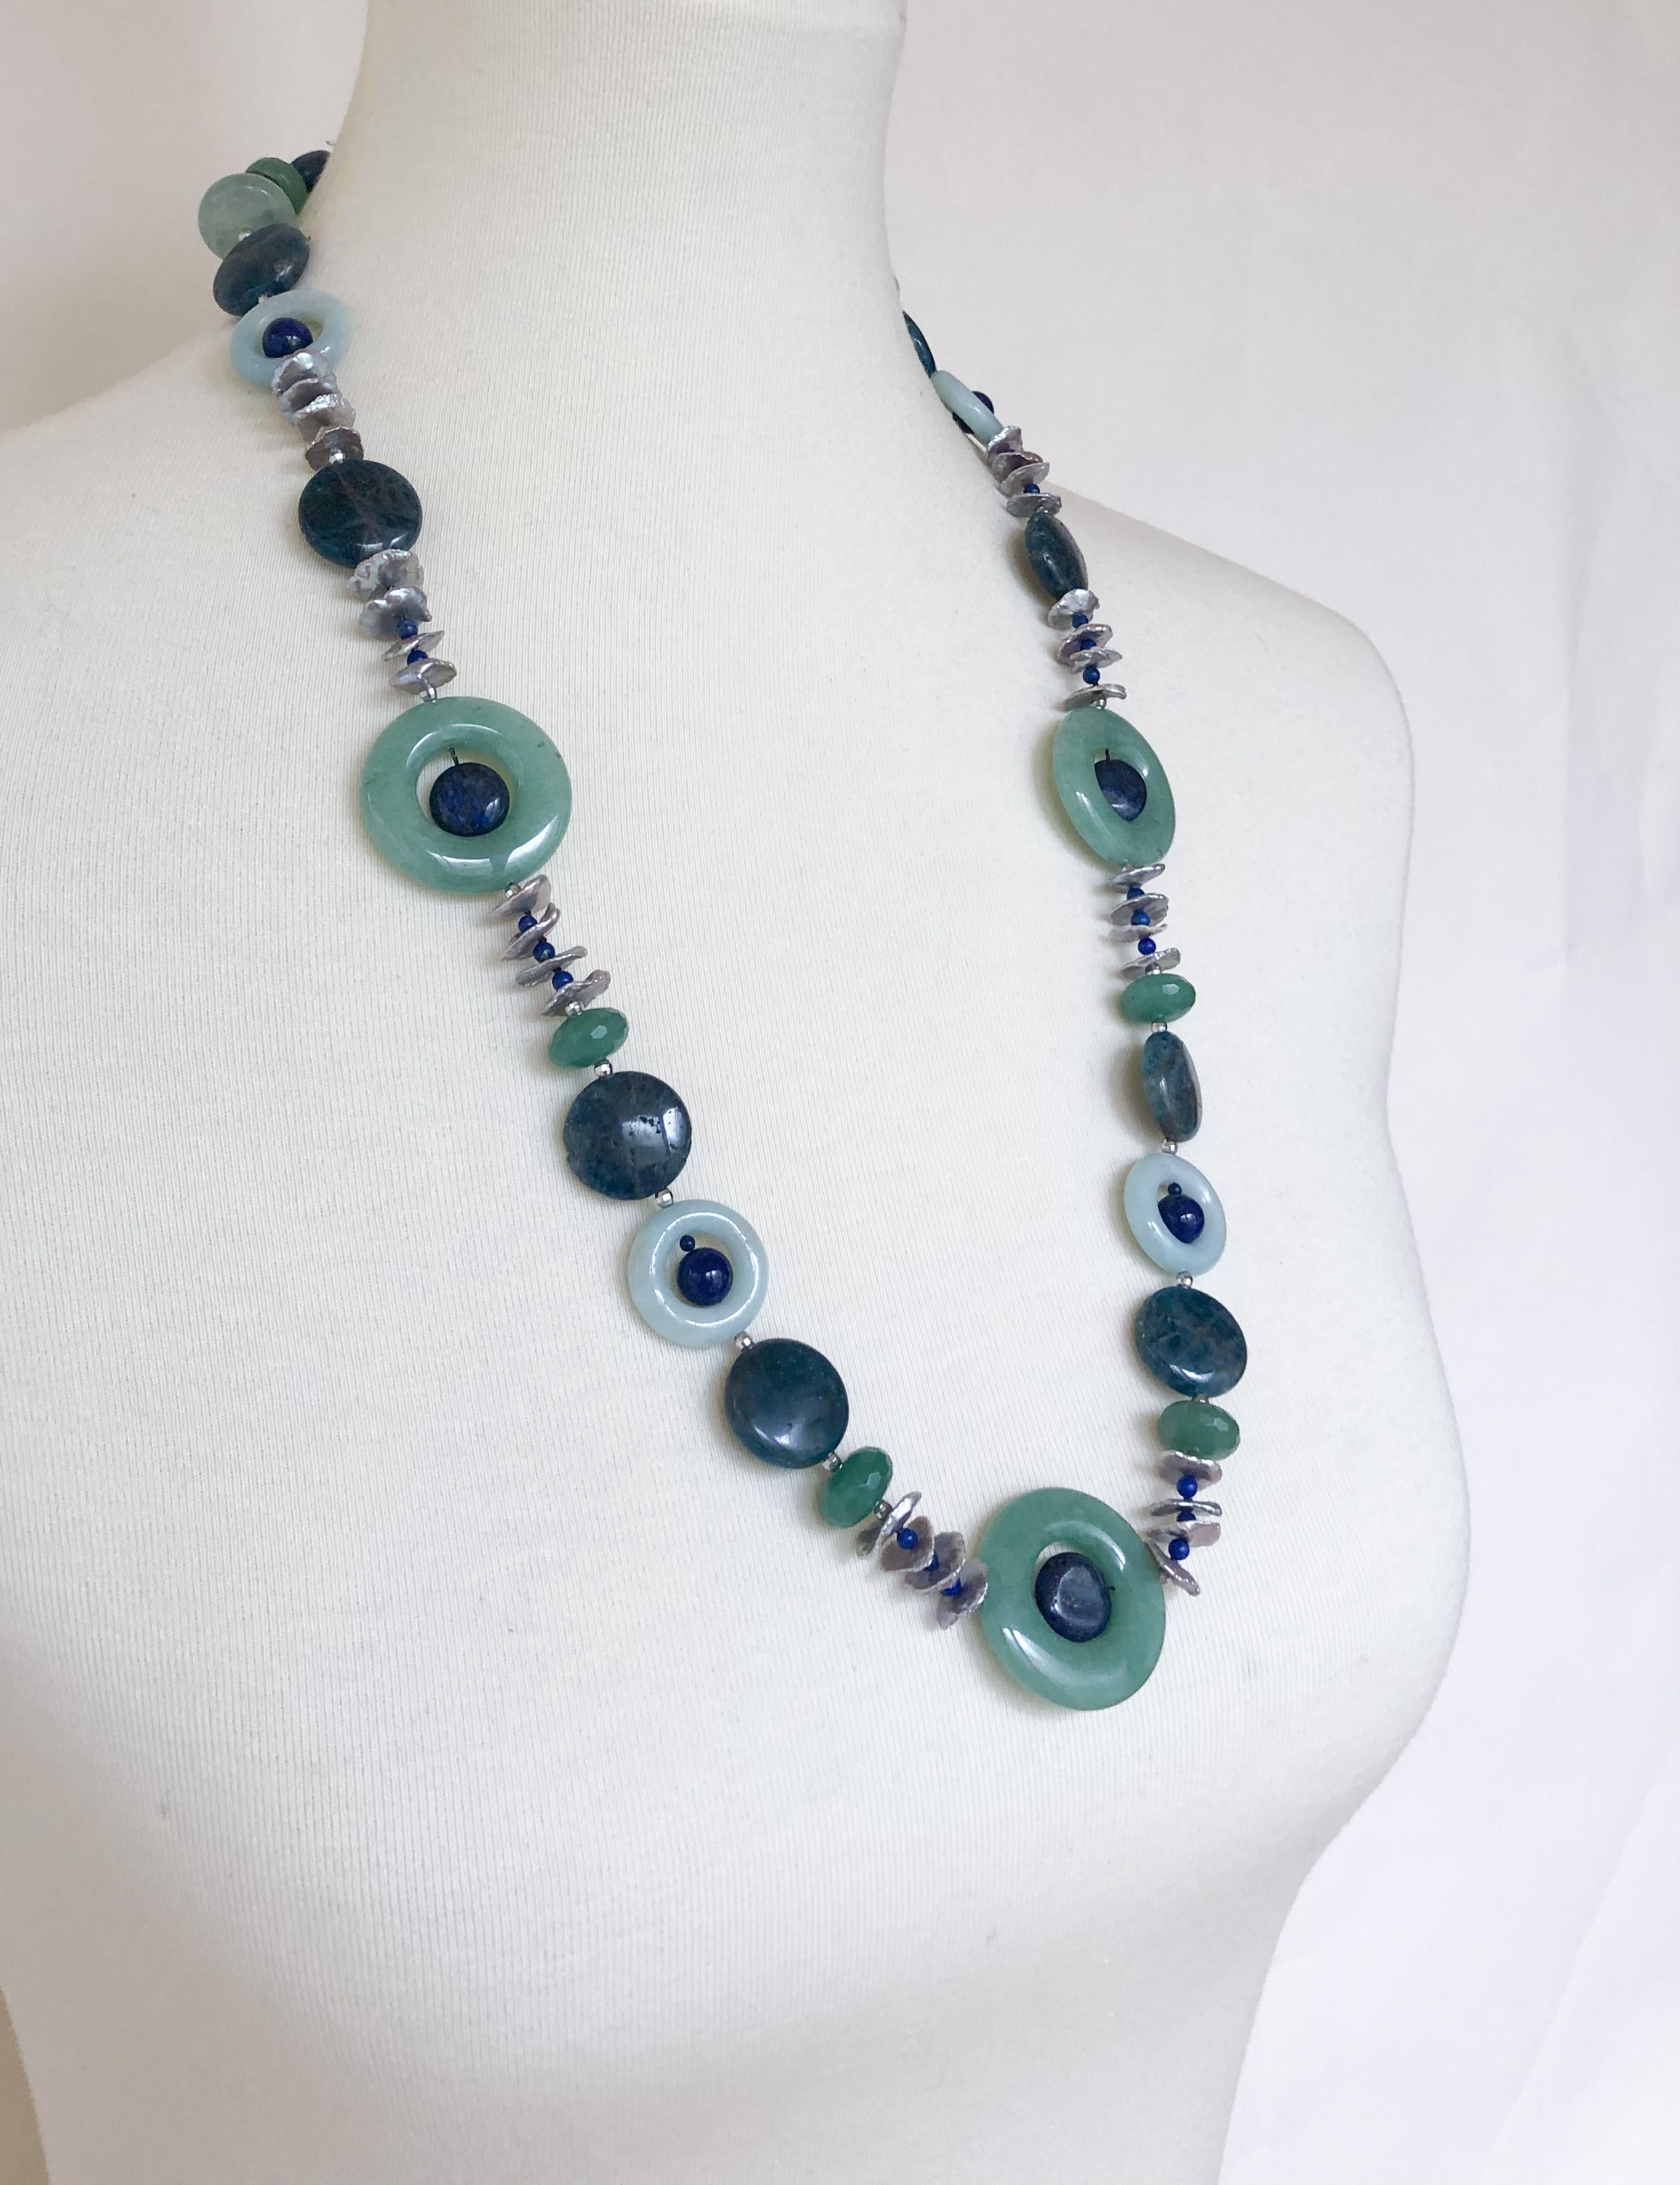 Great stone necklace by Marina J. This amazing piece is made using multi shaped Adventurine, Appatite, Amazenite, Bumorite and Lapis Lazuli. Irregular shaped Freshwater Grey Pearls and small Rhodium plated Silver disco beads (which vividly catch and